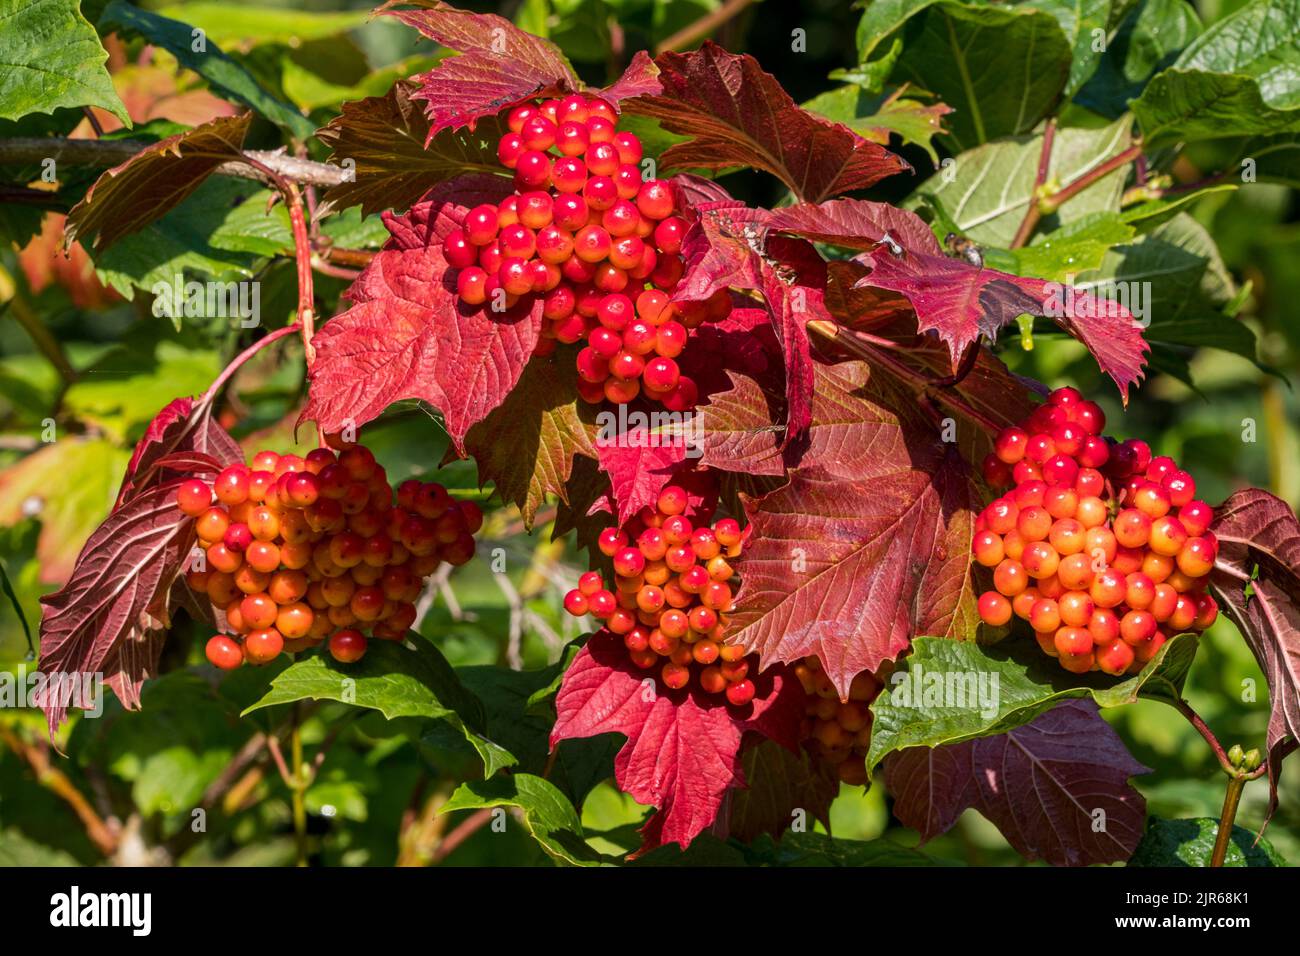 Guelder rose (Viburnum opulus) close-up of red berries / fruits and turned leaves showing autumn colours due to prolonged drought / heatwave in summer Stock Photo